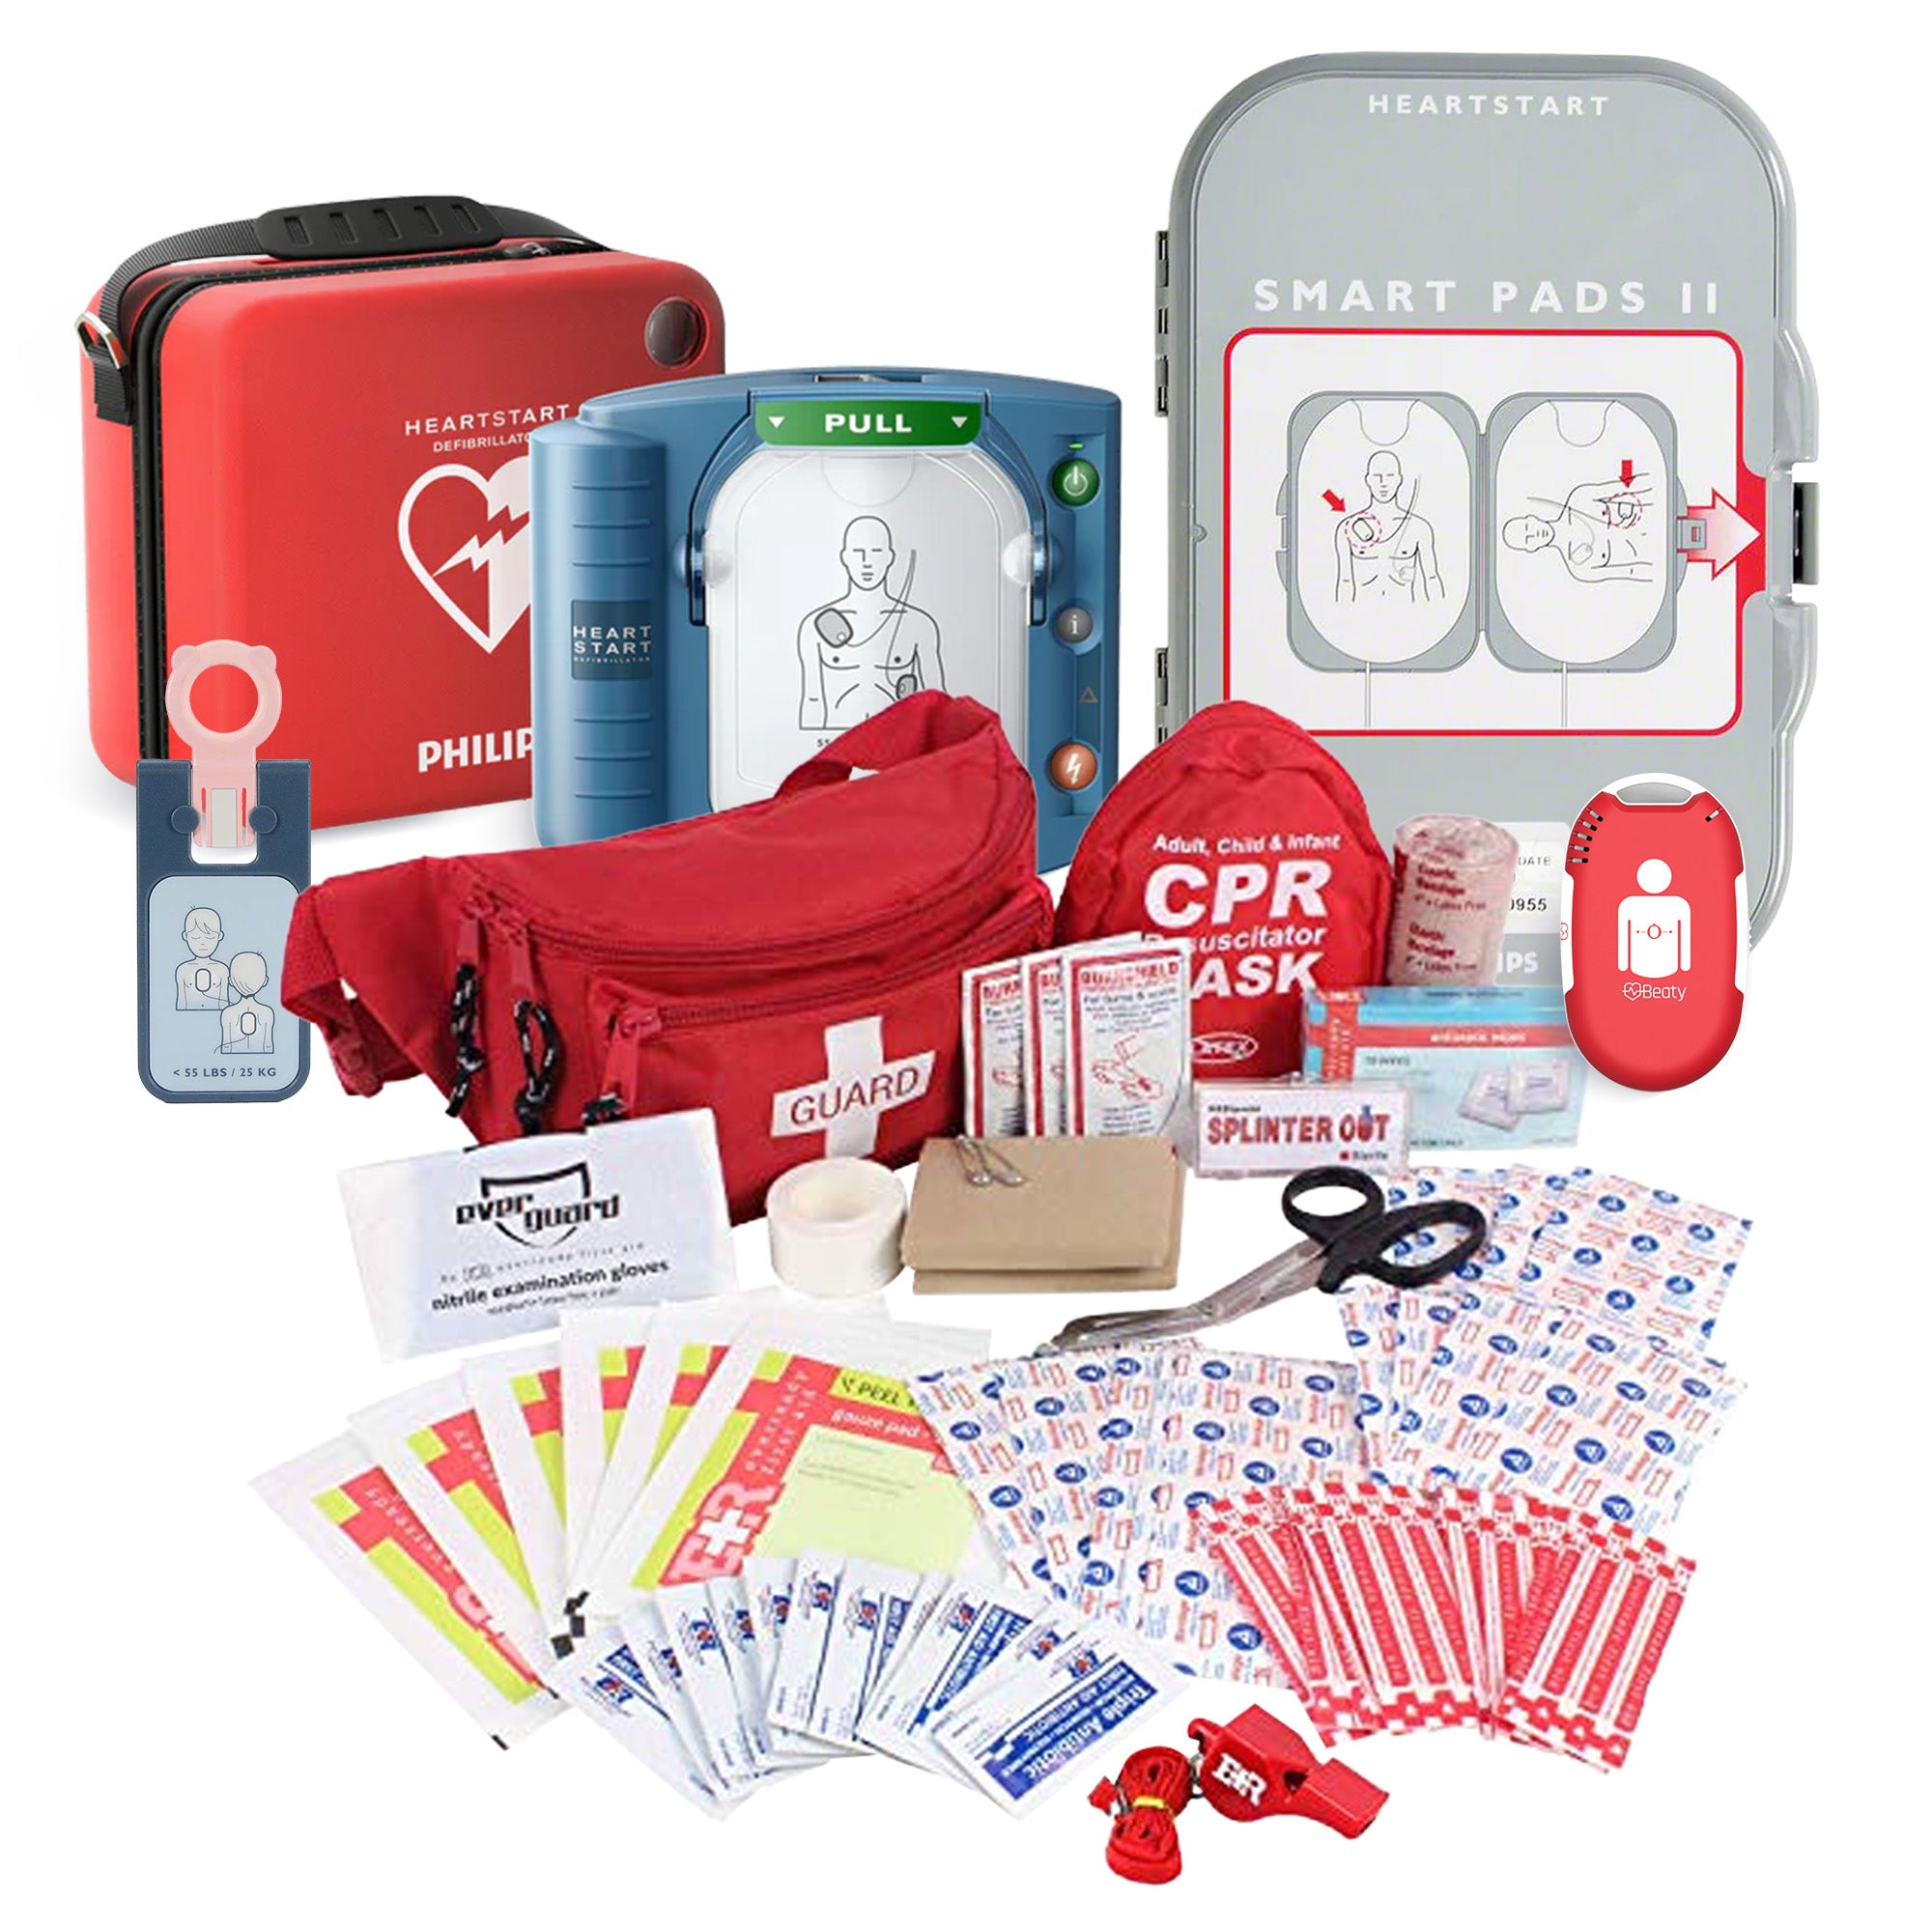 Ever Ready First Aid complete emergency kit with Philips AED, Defibrillation pads, and Beaty CPR (Adults and Children)